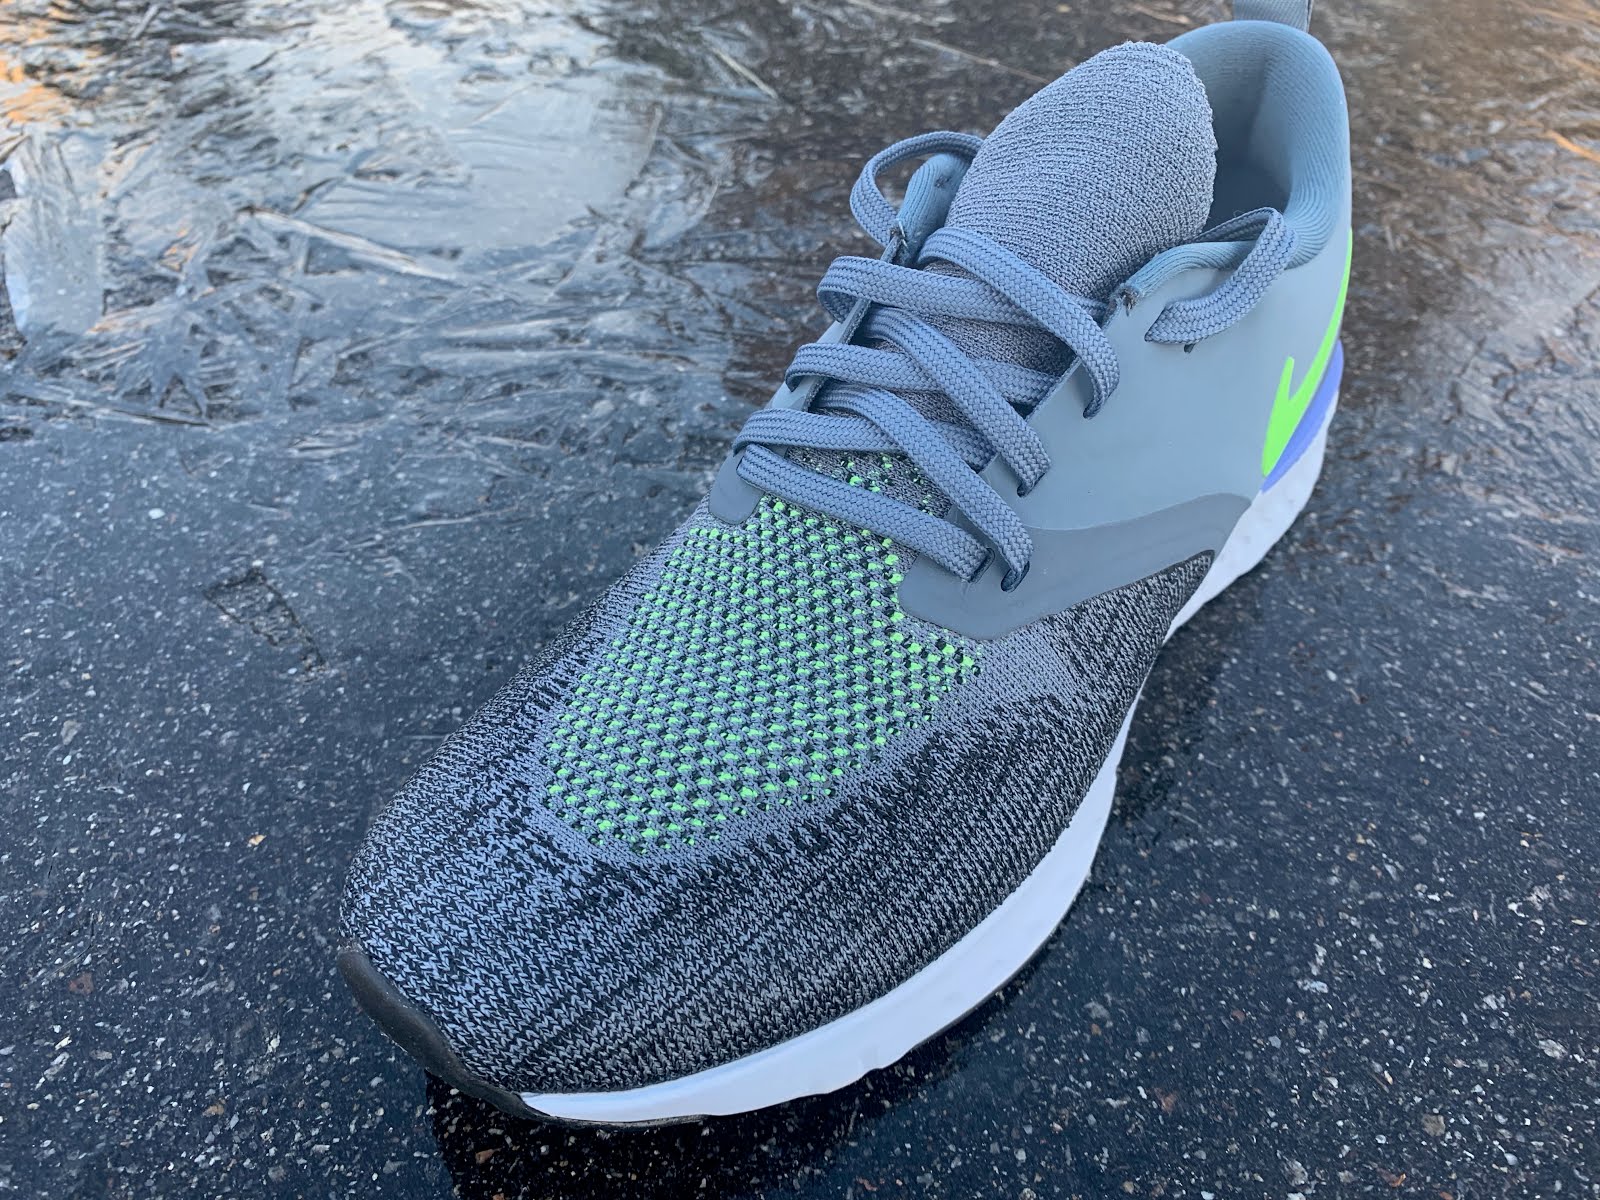 Road Trail NIke Odyssey React 2 Flyknit Initial Review: It's Epic React plus some Pop A Touch Stability